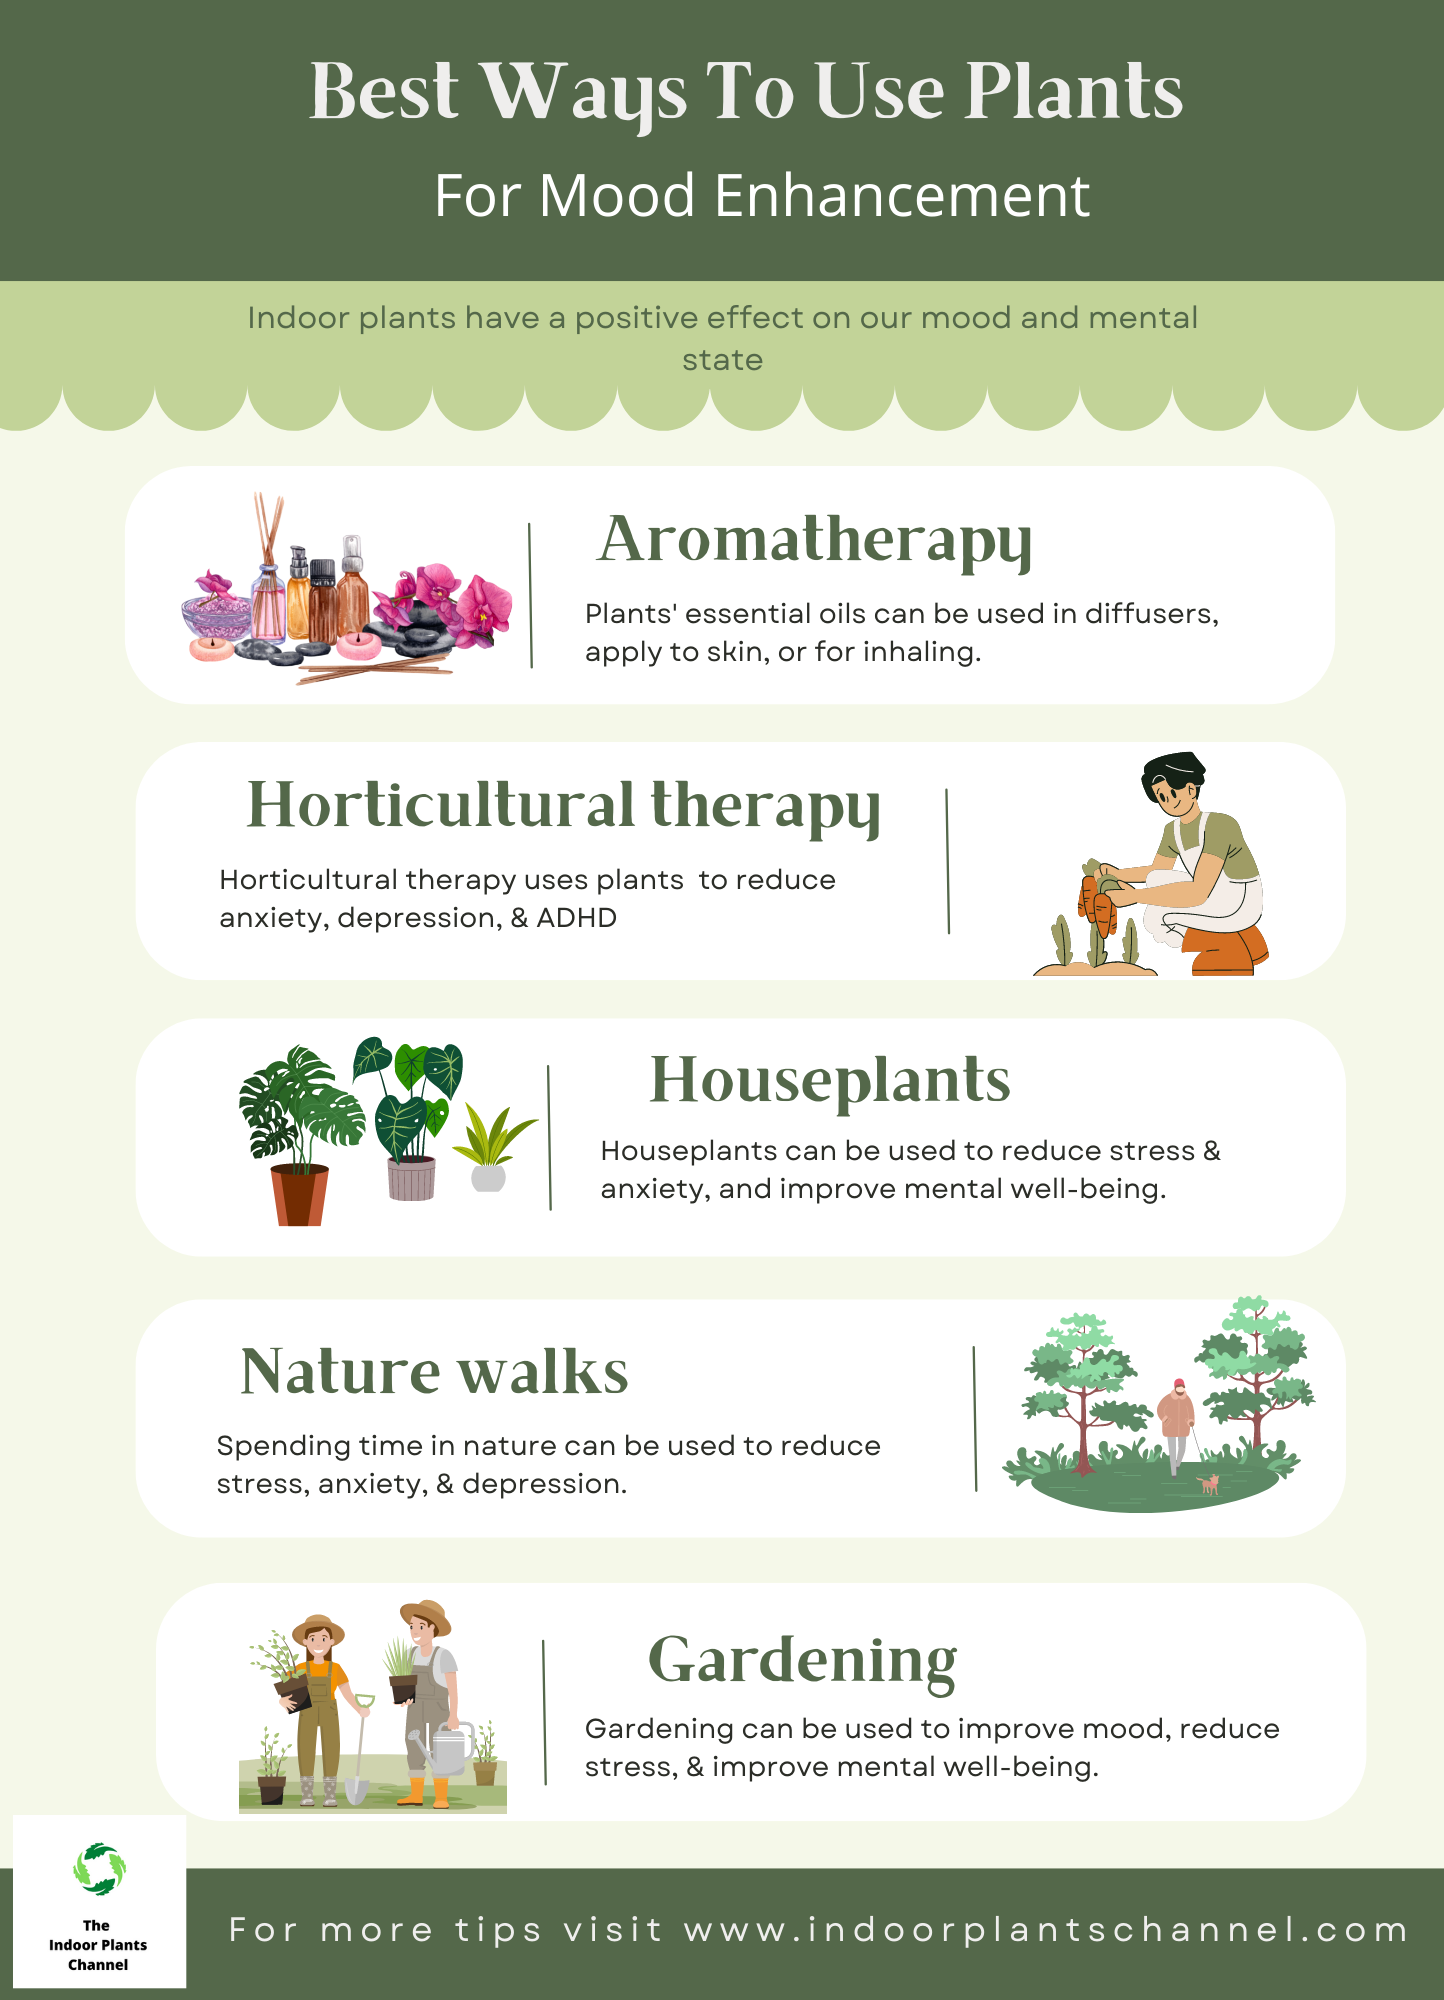 Best ways to use plants